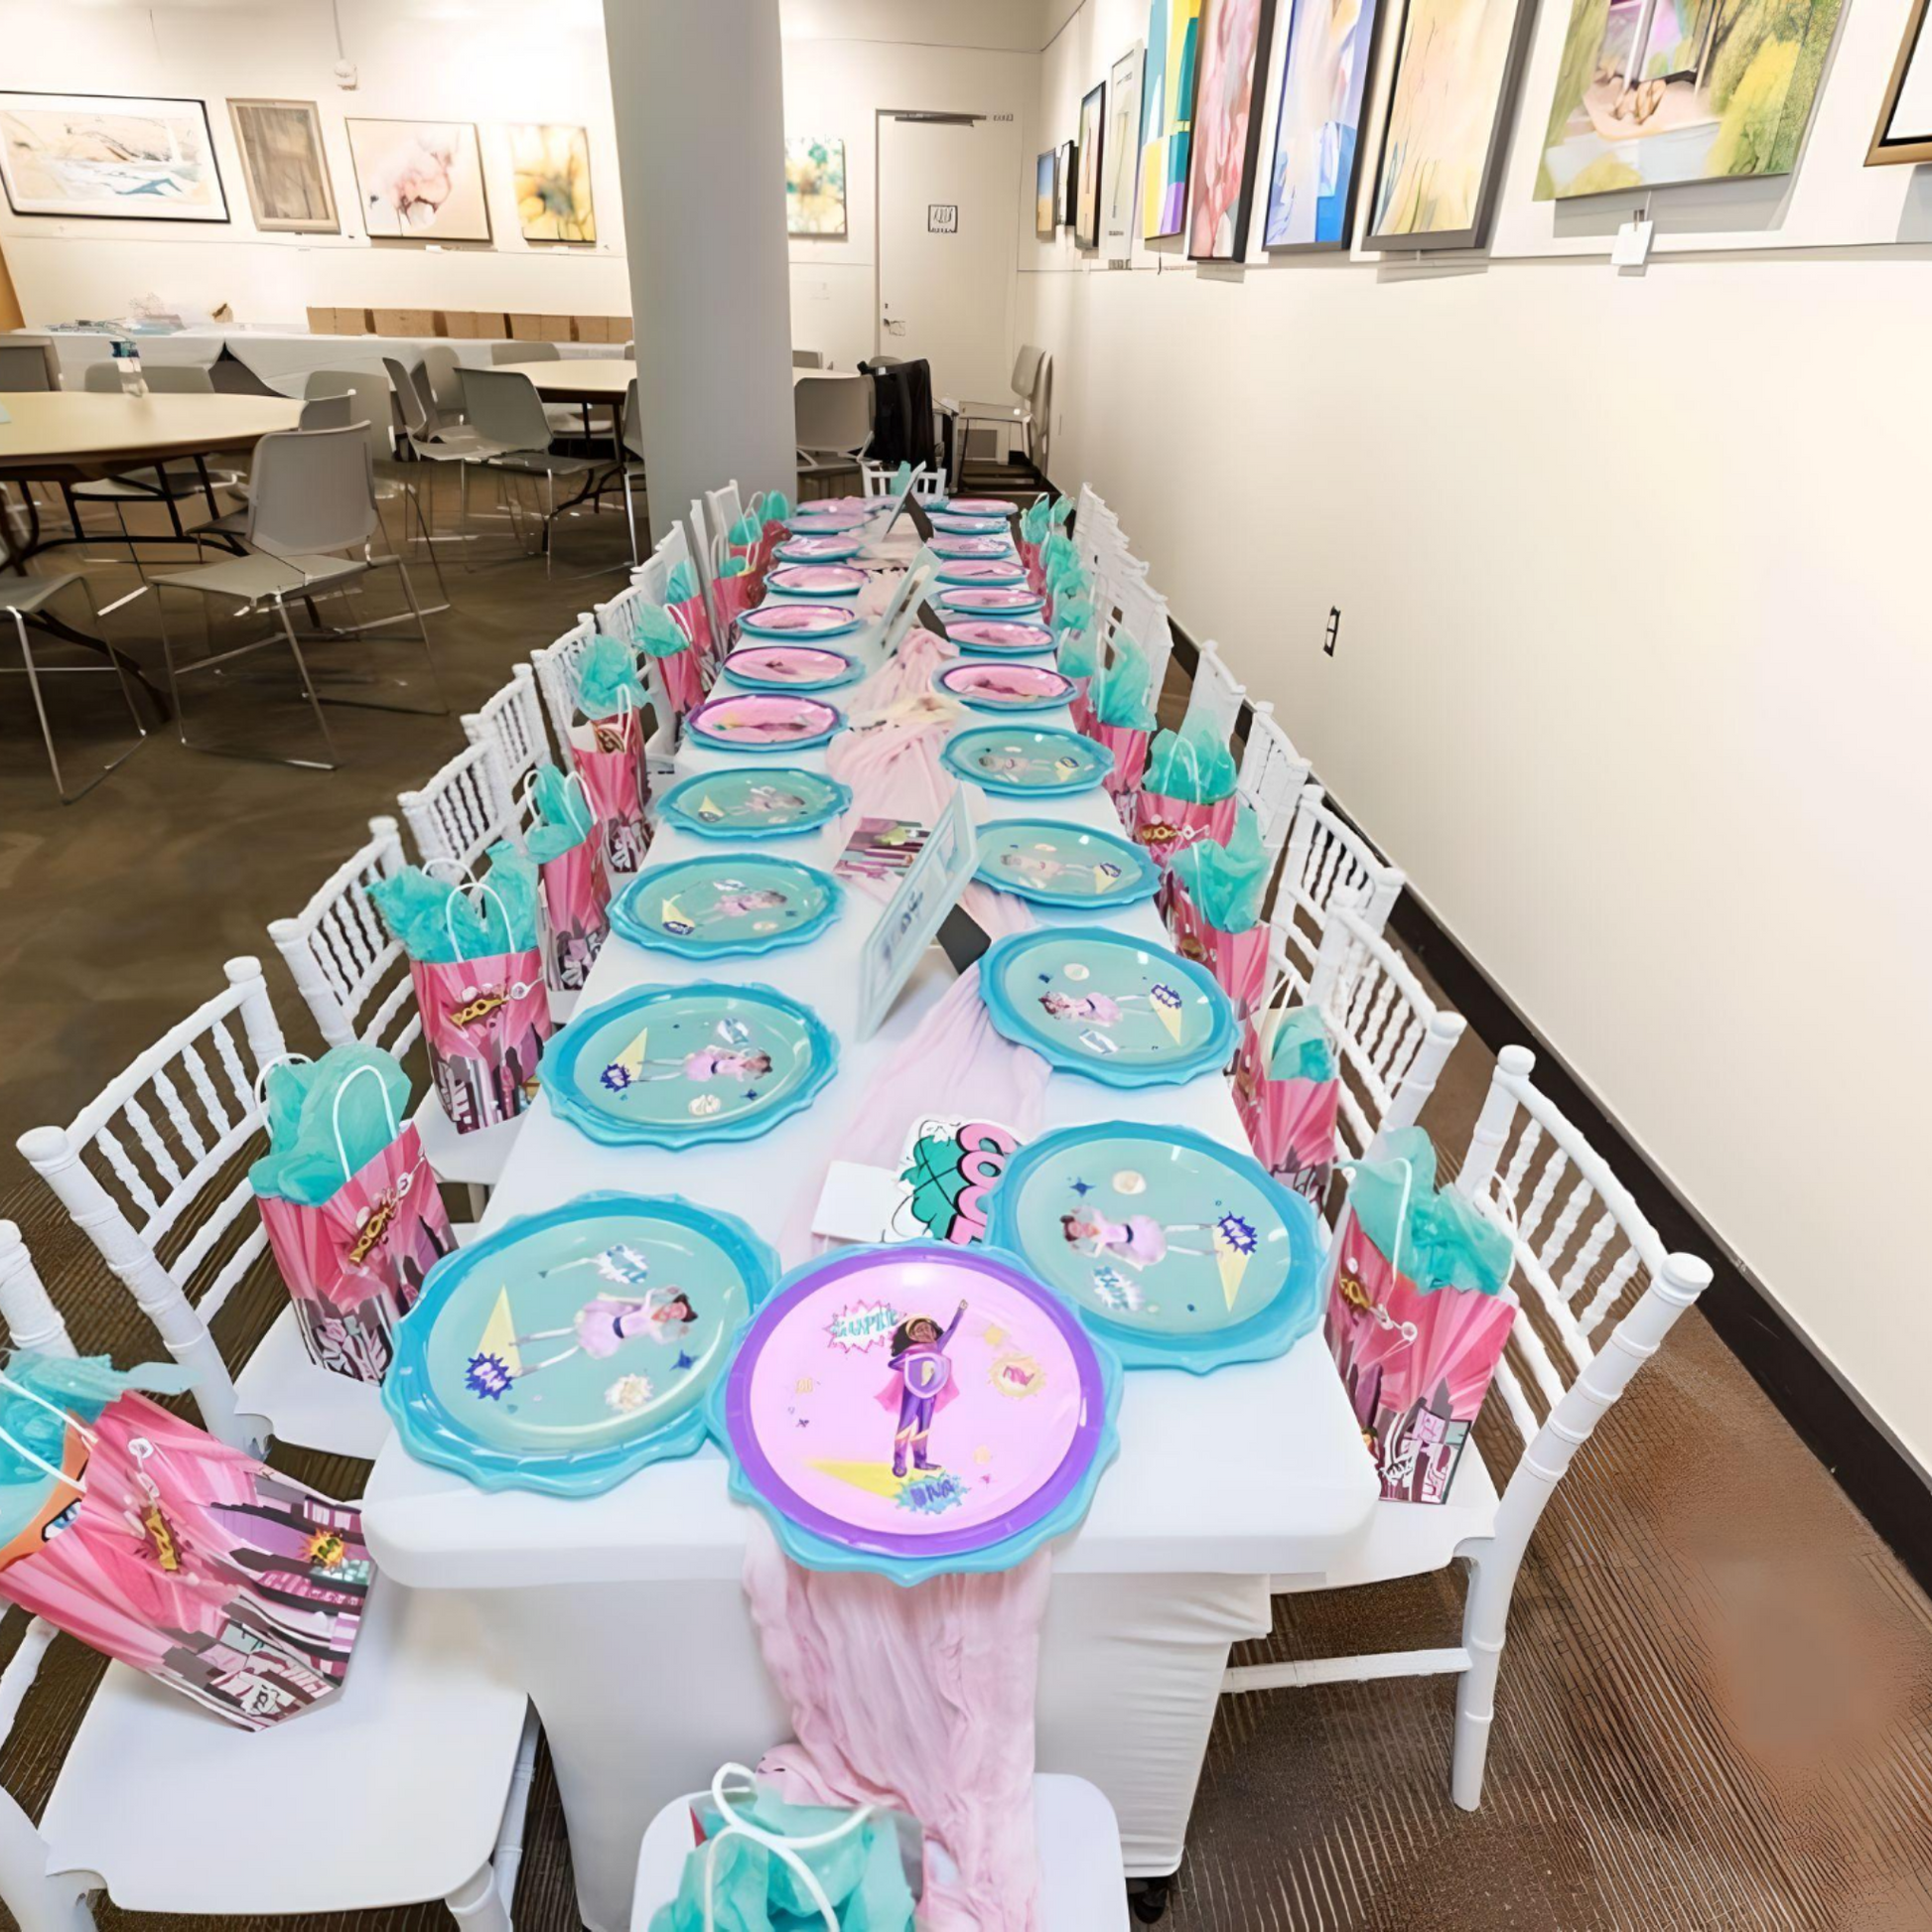 Supergirl party set tableware decorations ideas